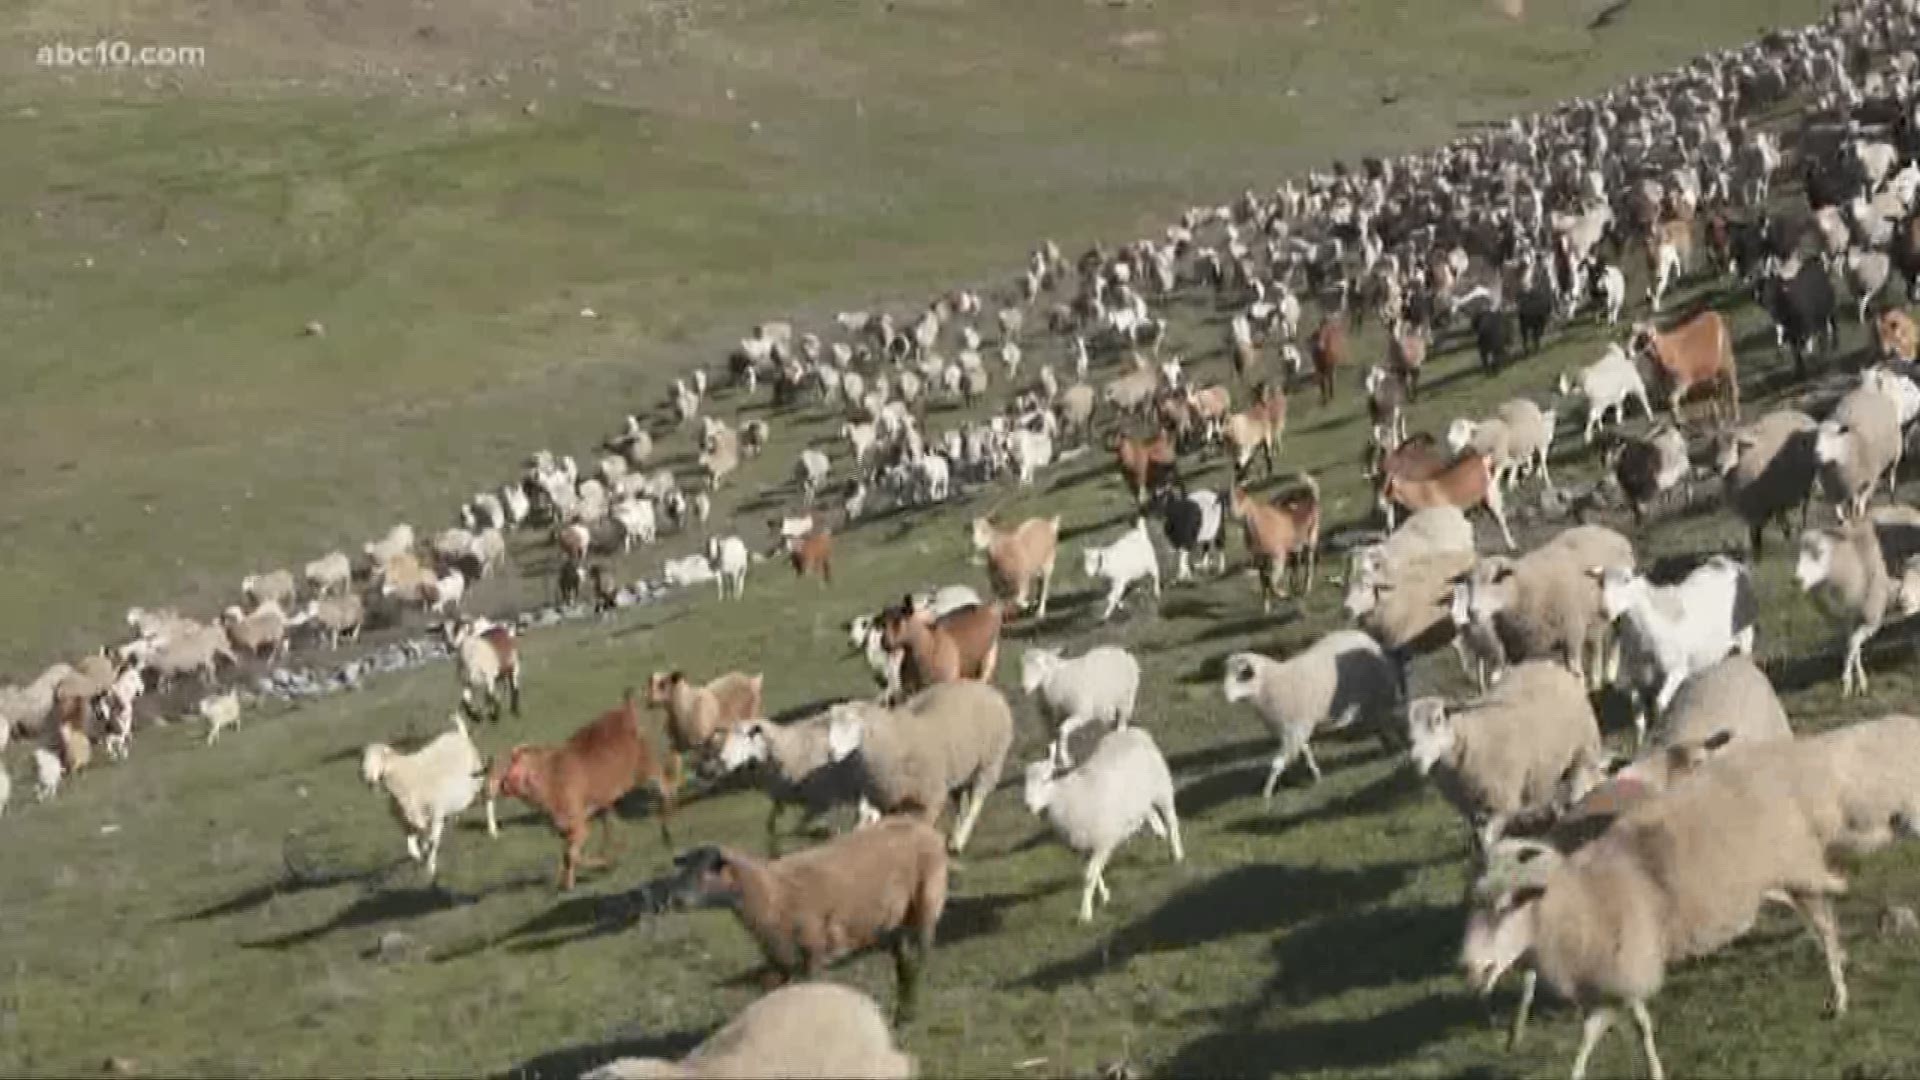 The city of Rocklin is using goats to clear out the grass and weeds to reduce fire fuels, which also reduces the risk of potential wildfires.